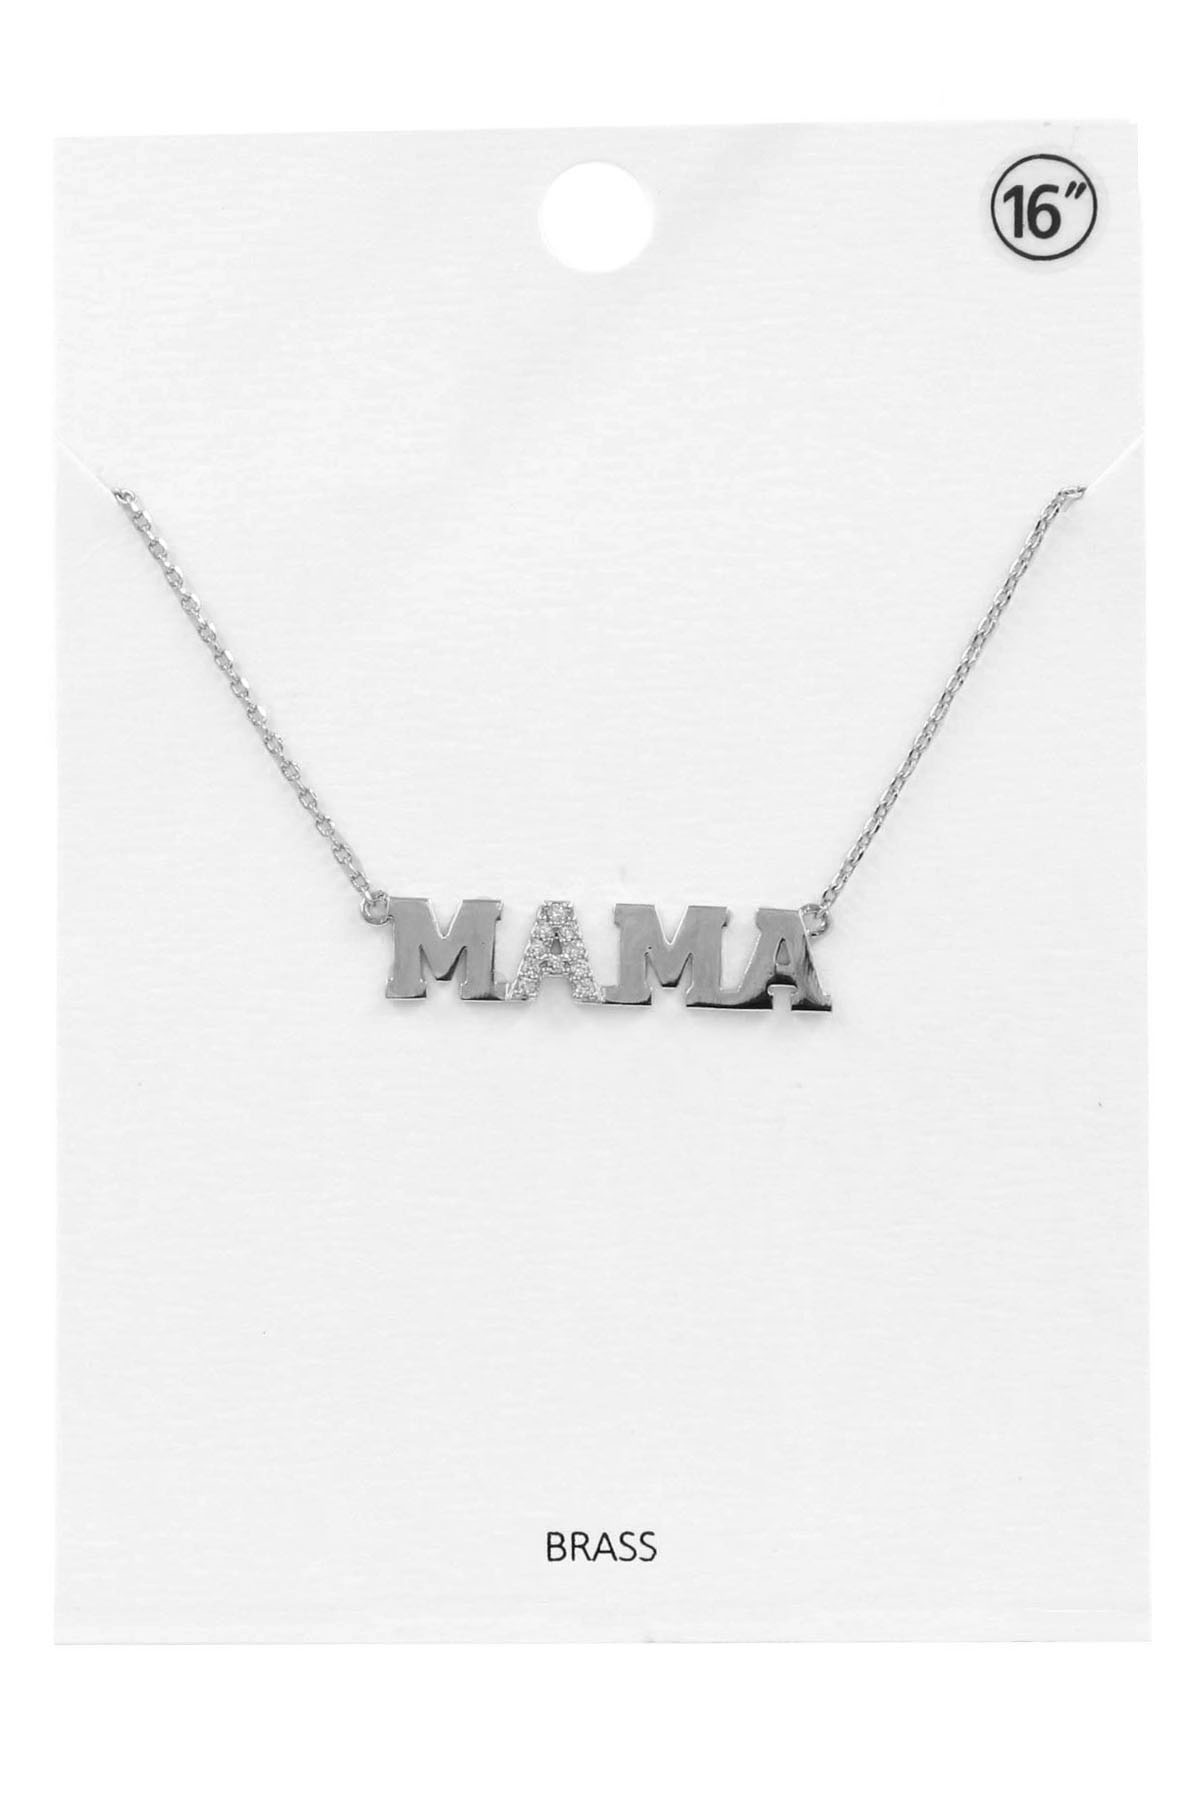 GOLD Brass MAMA Necklace - Necklaces